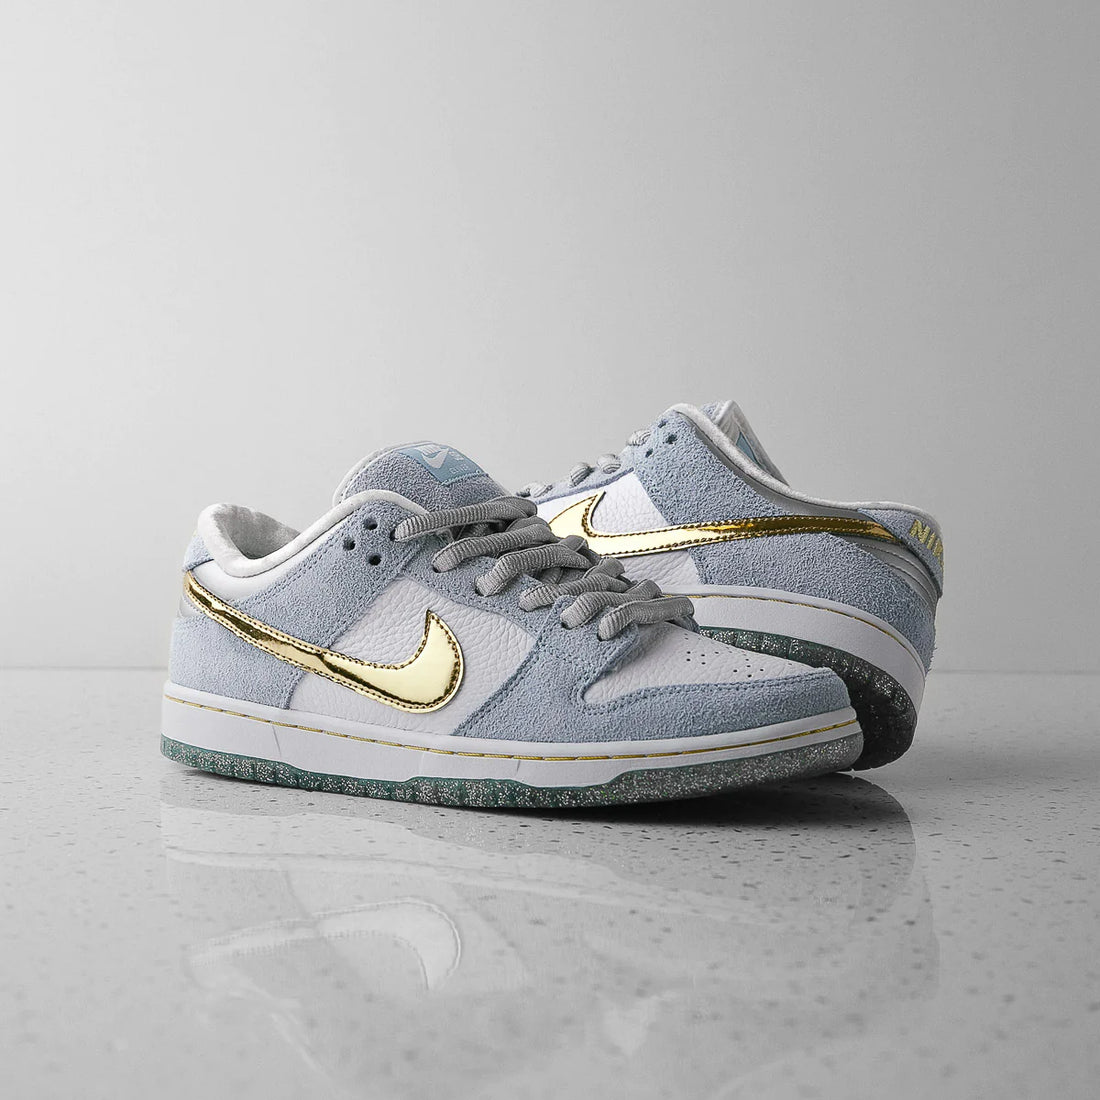 13/01/24- Weekly Sneaker Drop: Featuring The Nike SB Dunk x Sean Cliver